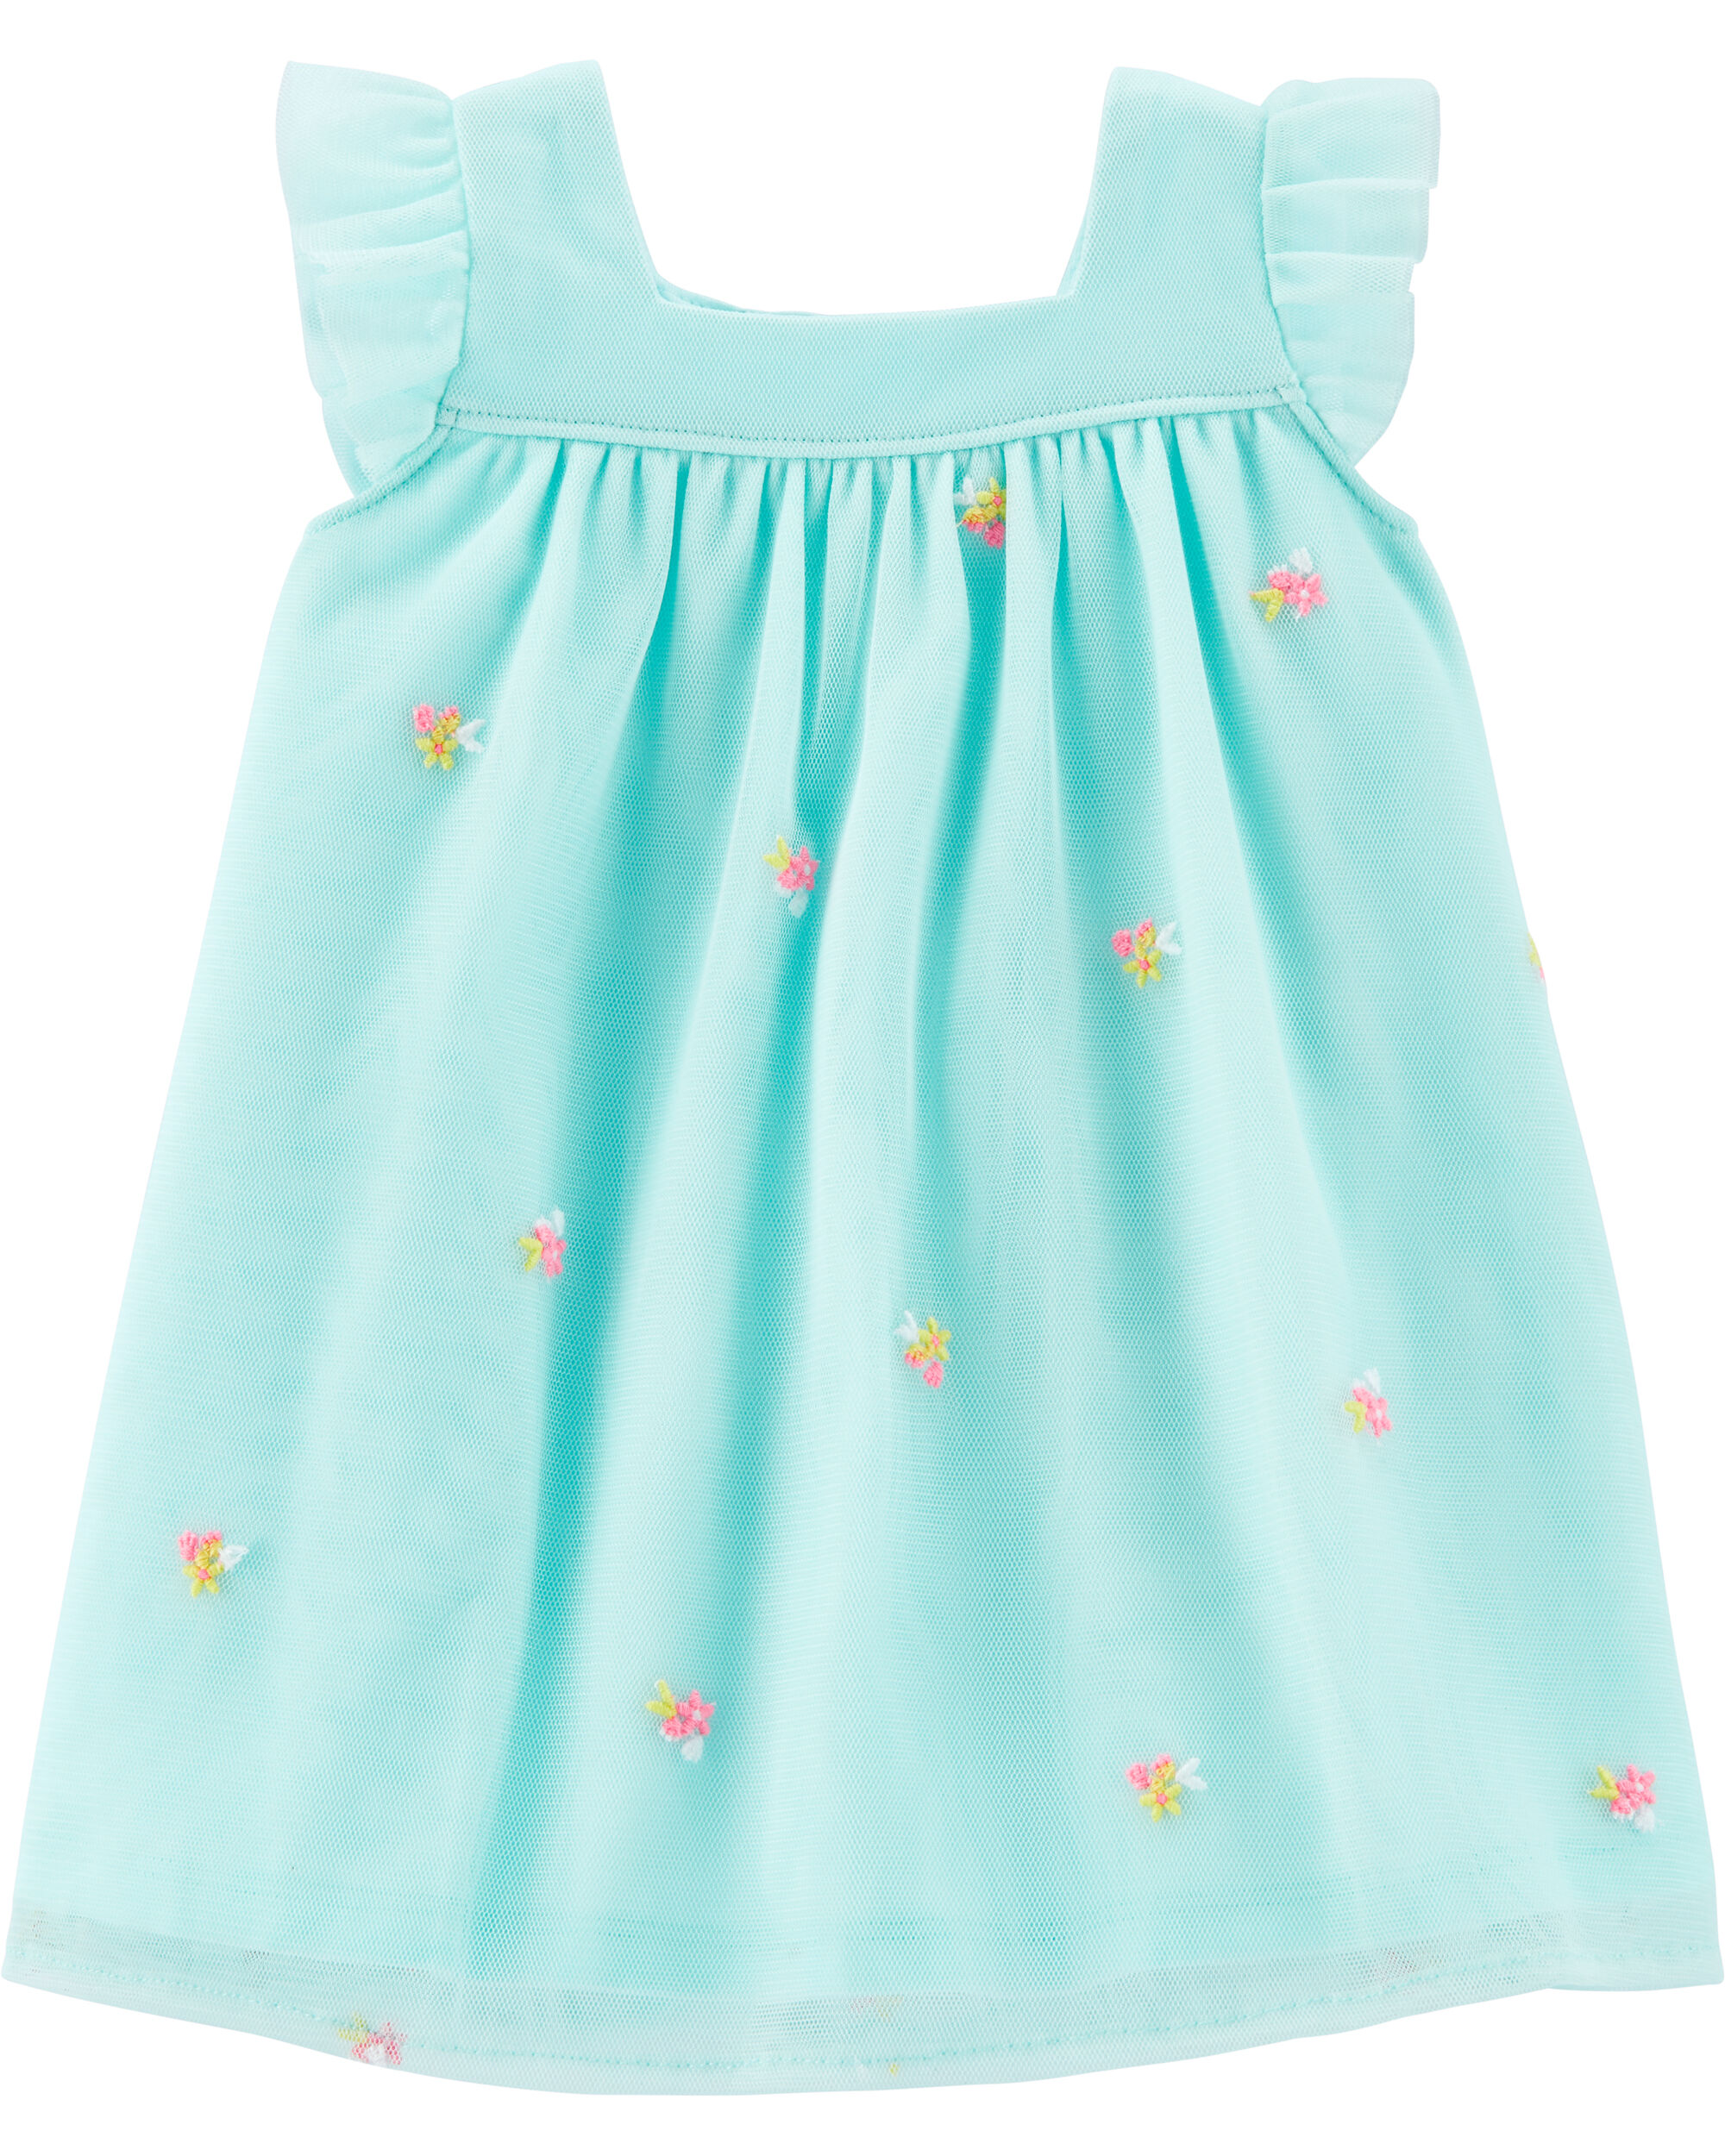 carters baby girl holiday dresses